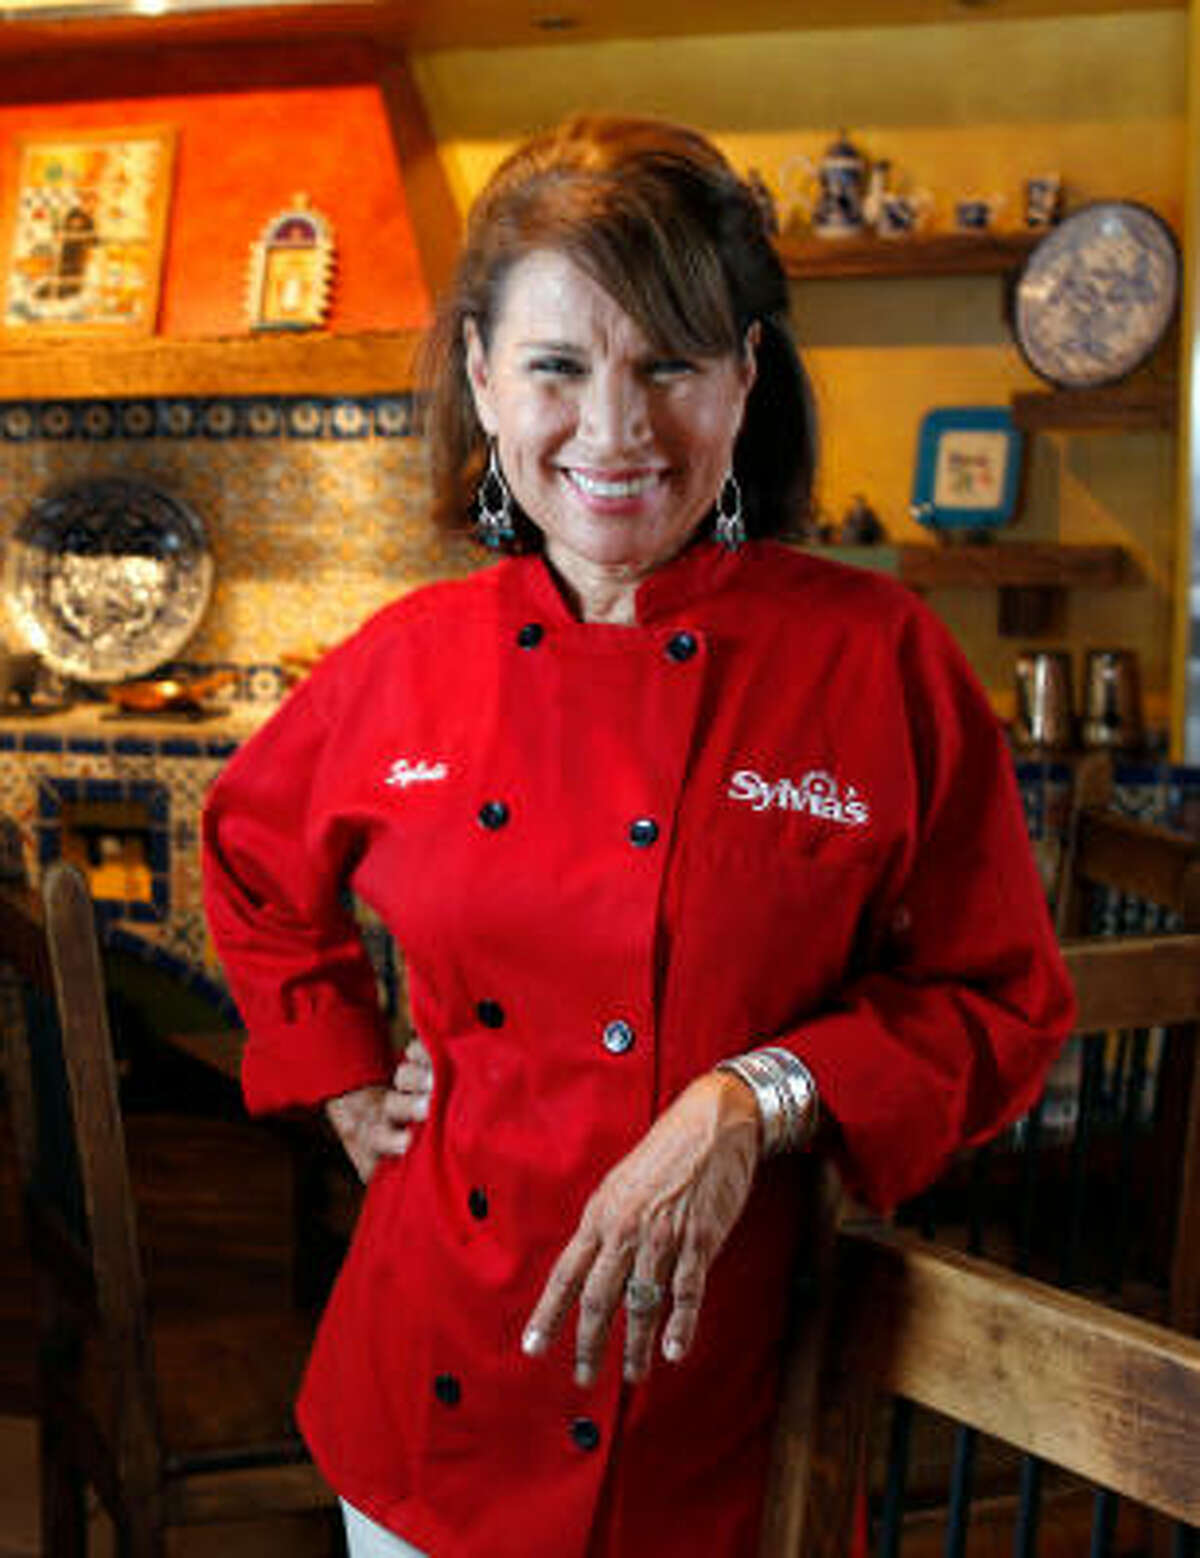 Casares started her local culinary career in 1995.